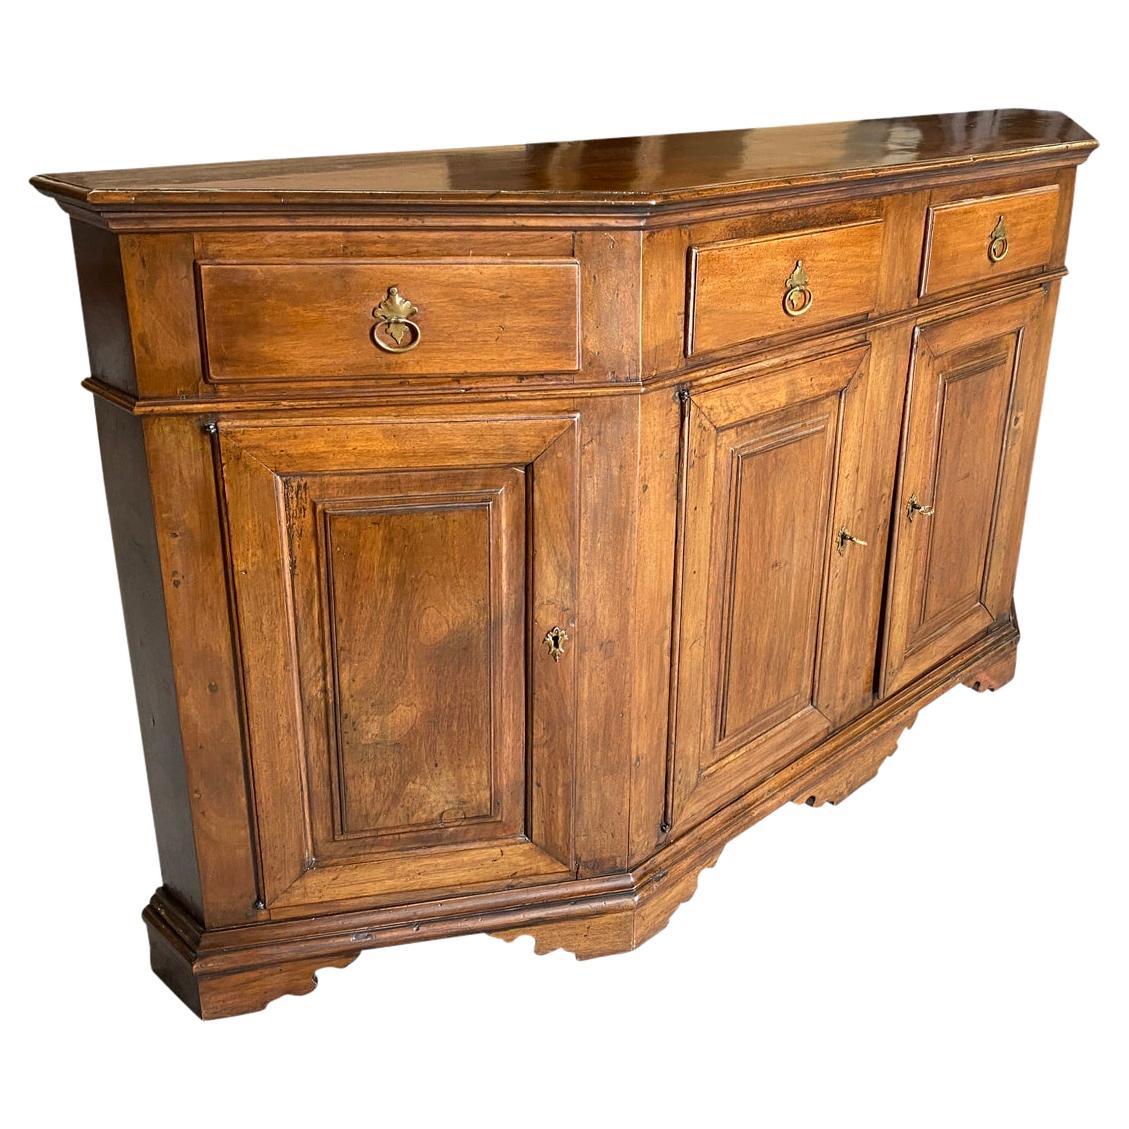 A very handsome 18th century Credenza from the Veneto region of Italy.  Beautifully constructed from walnut in the Scantonata form with a molded edge top above a conforming case housing two diagonal opening drawers and two central drawers.  The